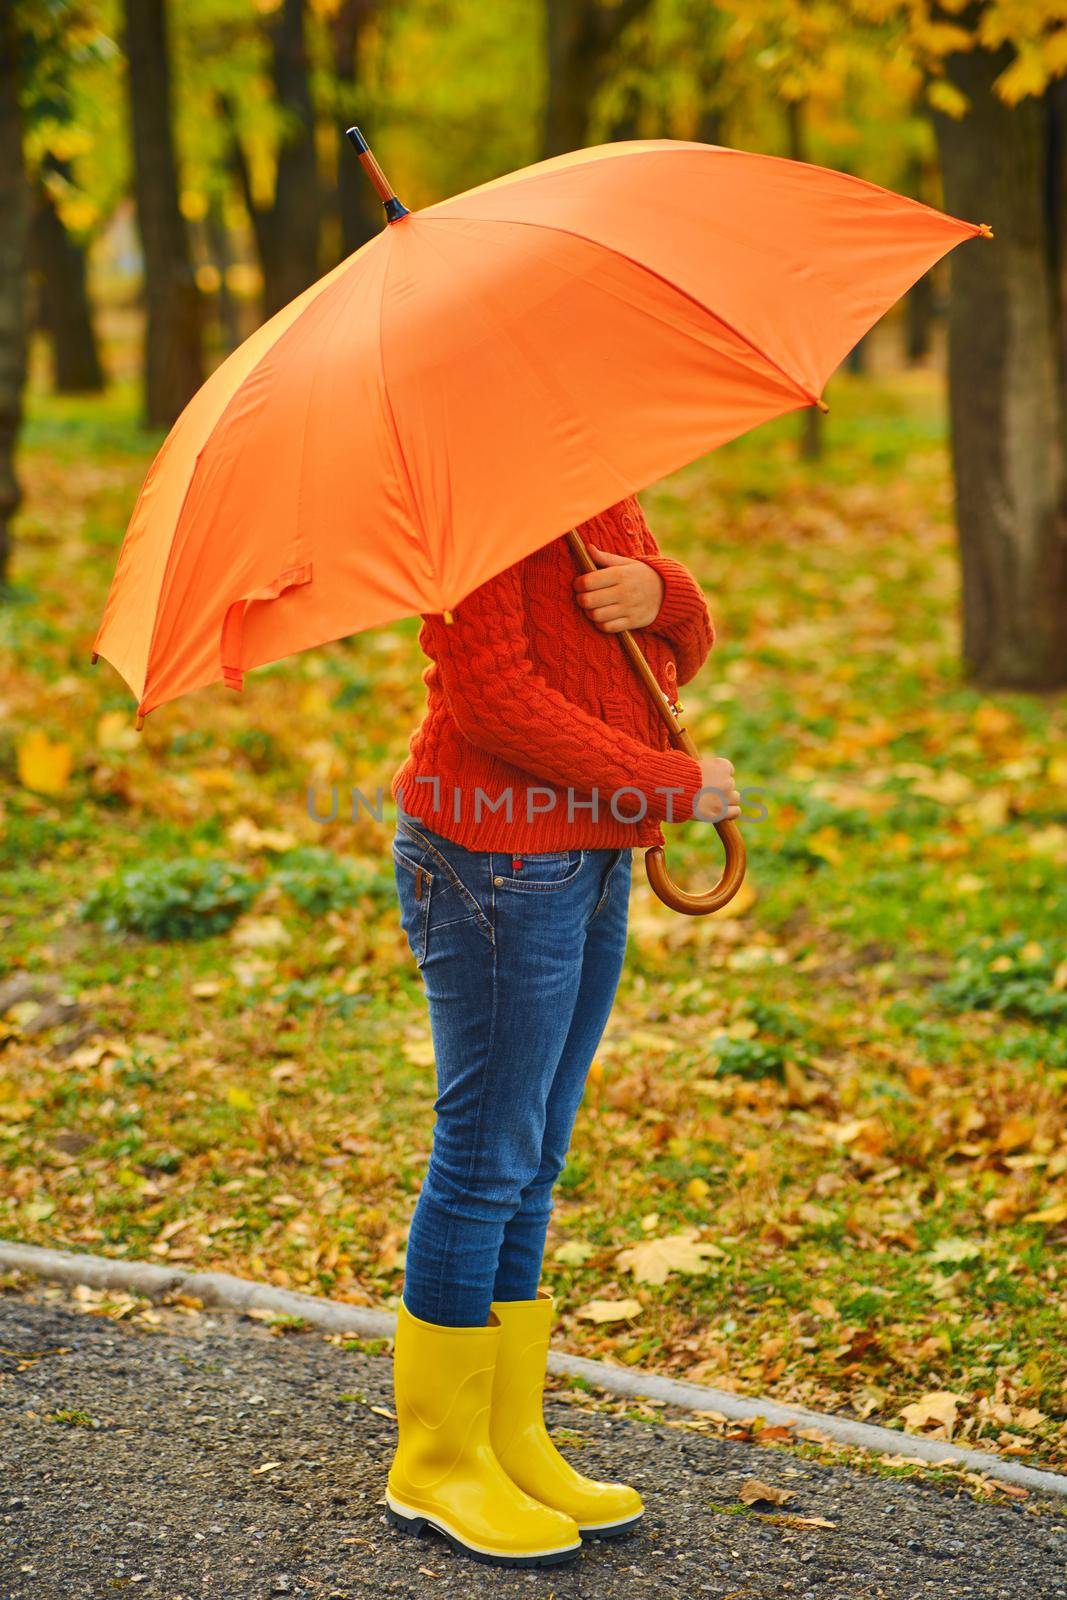 Funny unrecognizable kid in rubber boots under an orange umbrella outdoors in Autumn park